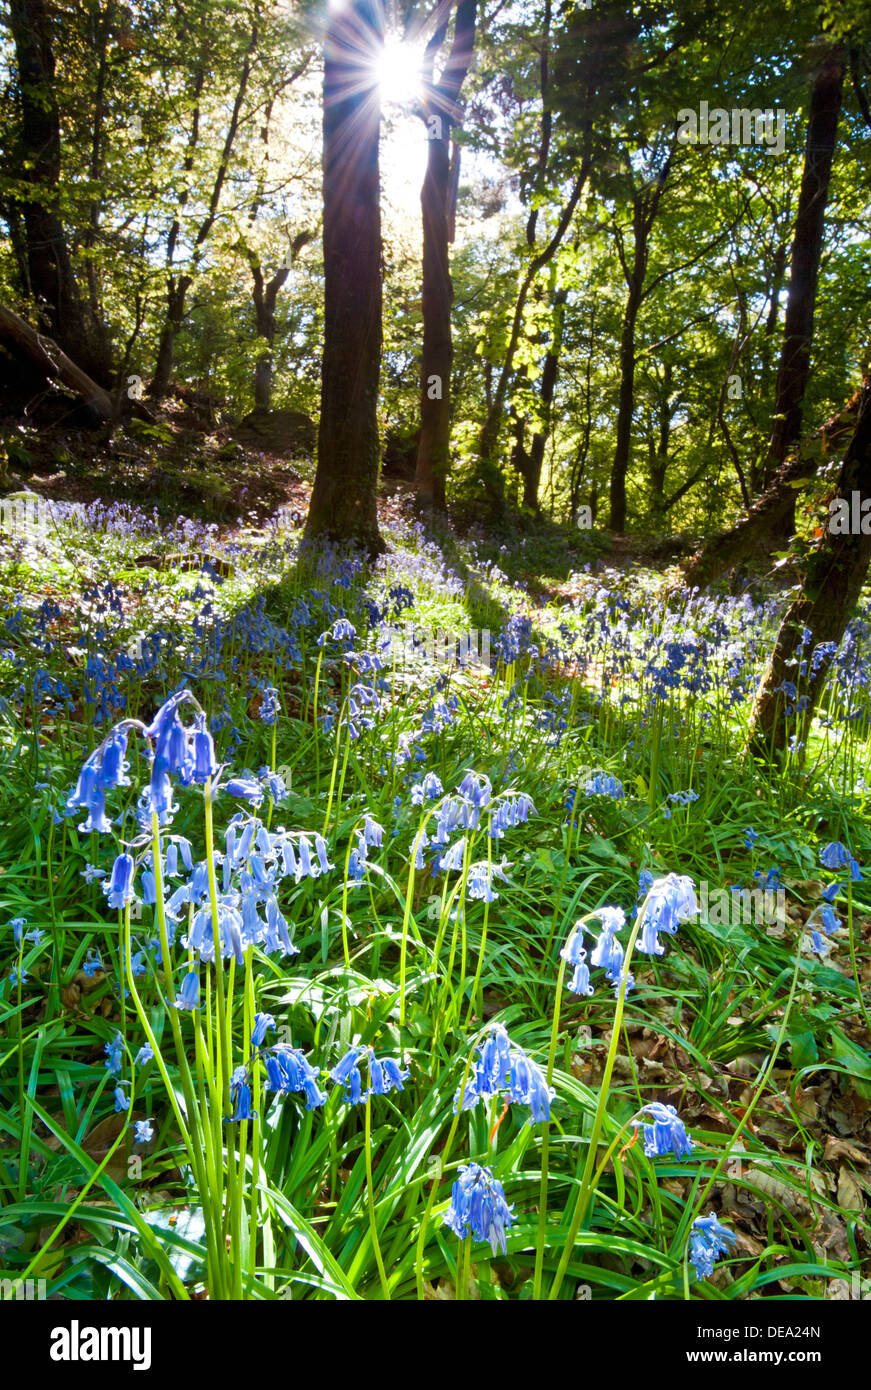 Sunlight and Shadows in a Bluebell Woodland, England, UK Stock Photo